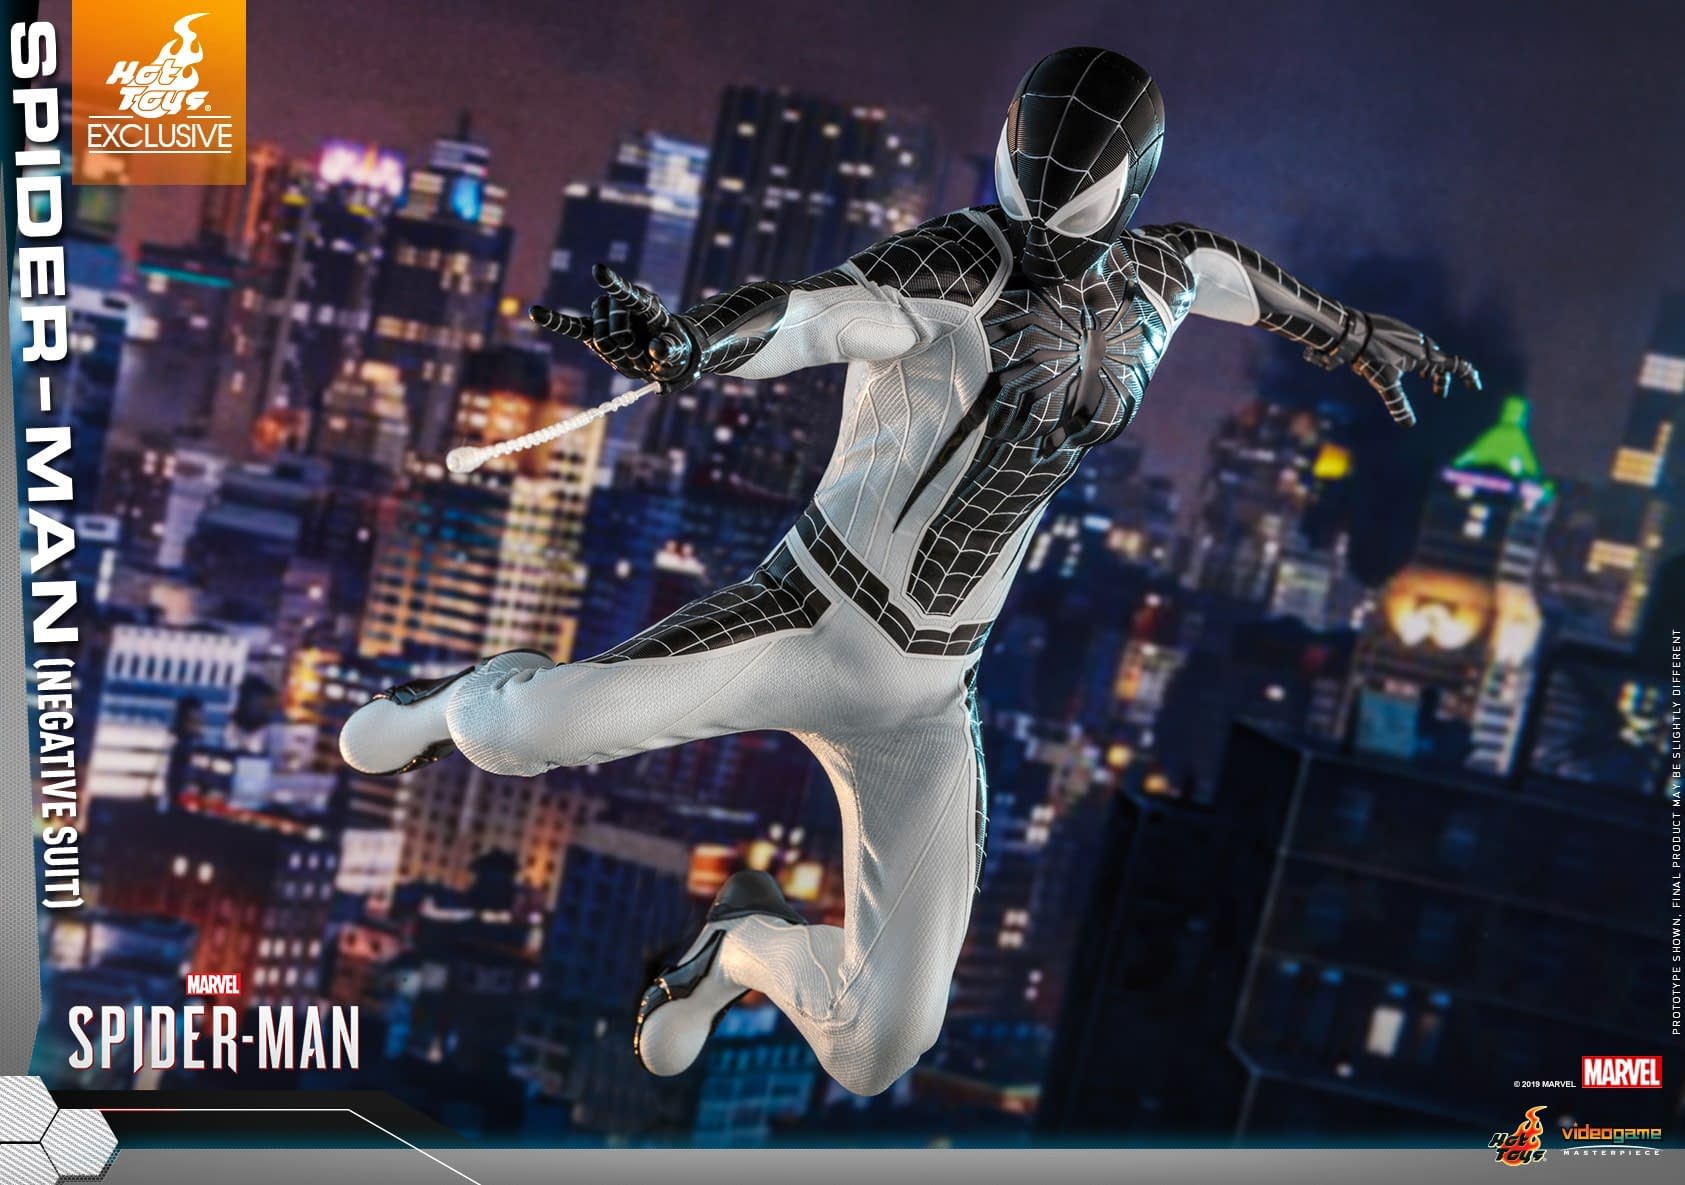 "Marvel's Spider-Man" Goes Negative with a New Hot Toys Figure